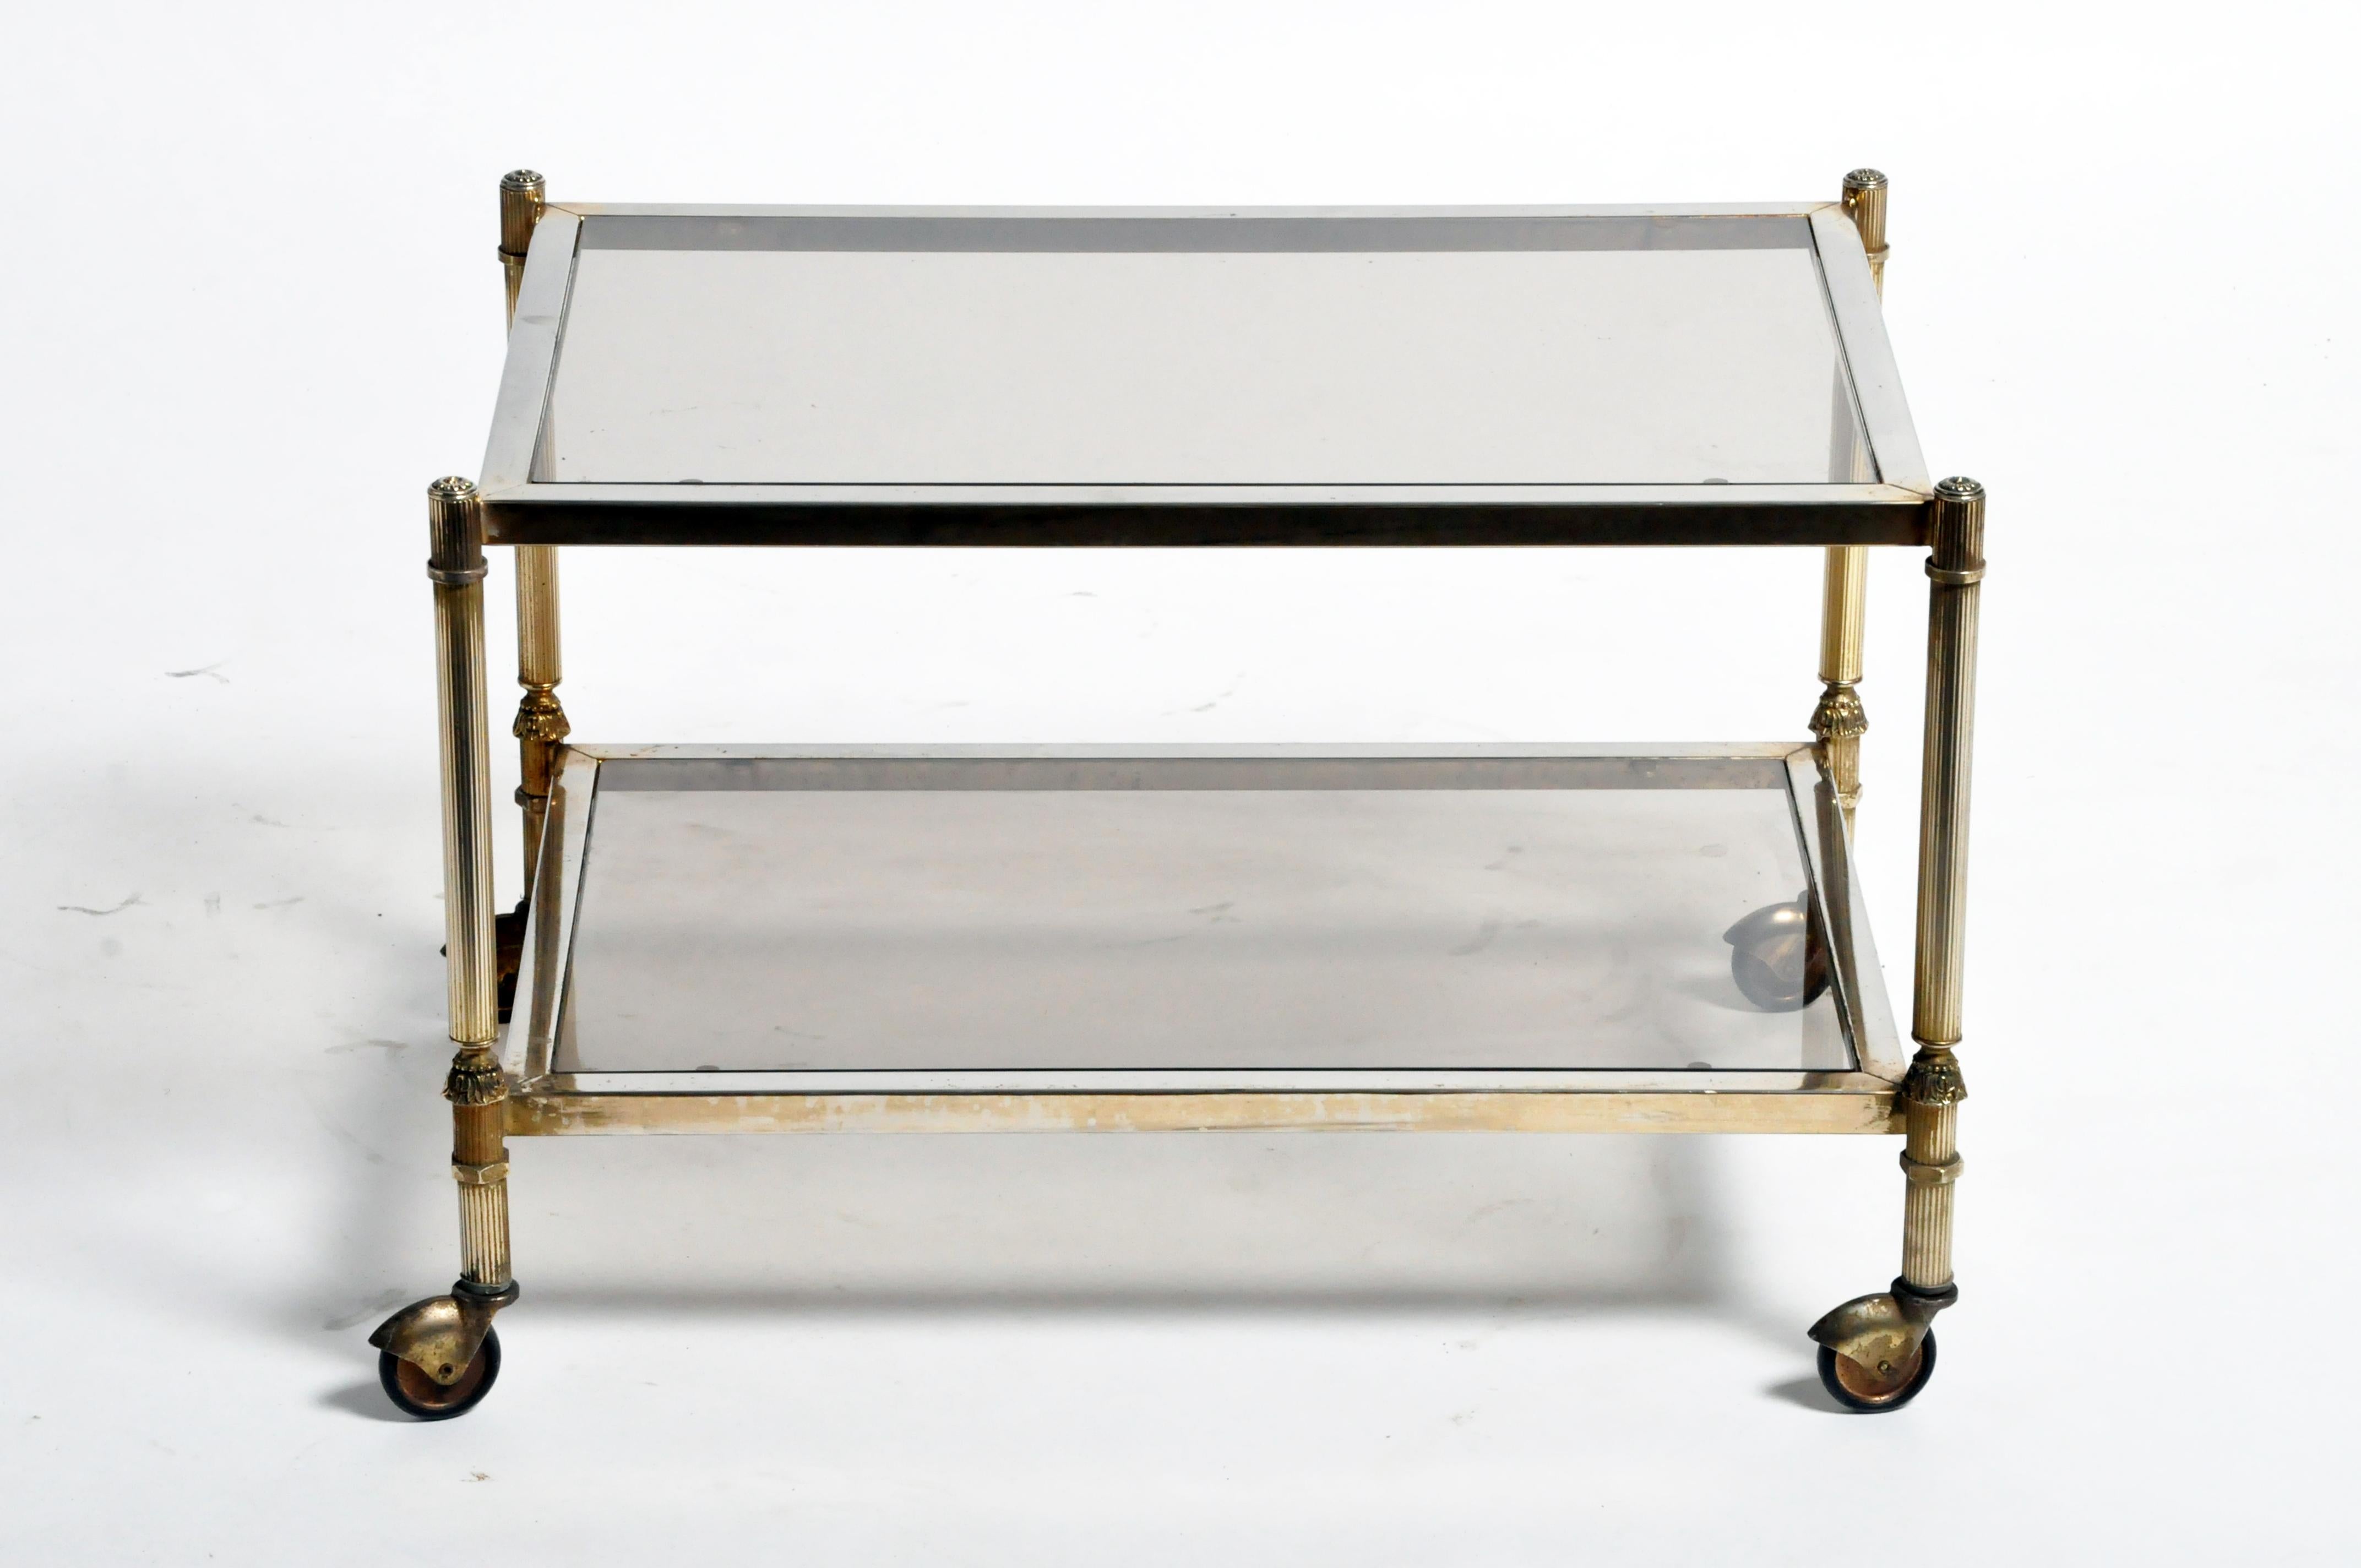 This simple serving table is from France and was made from glass and chrome, circa 1960s. The piece features beautiful clean lines, wheels, and its original patina. Wear consistent with age and use.